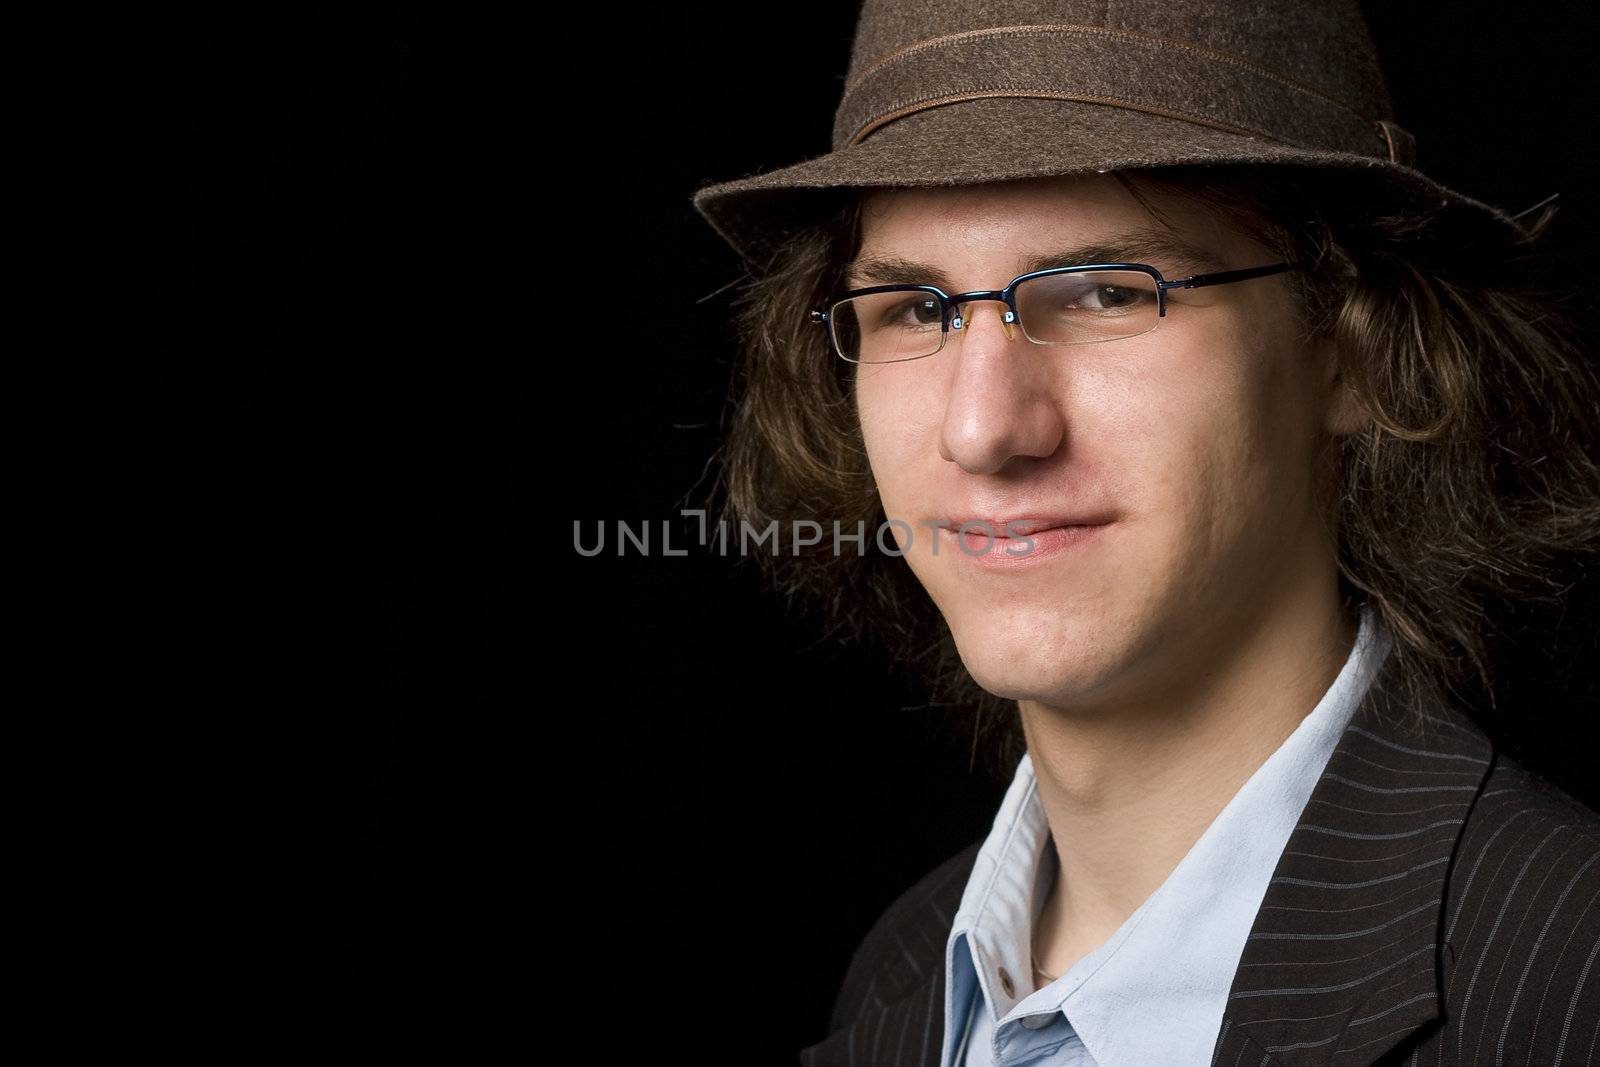 Male teenager with a hat